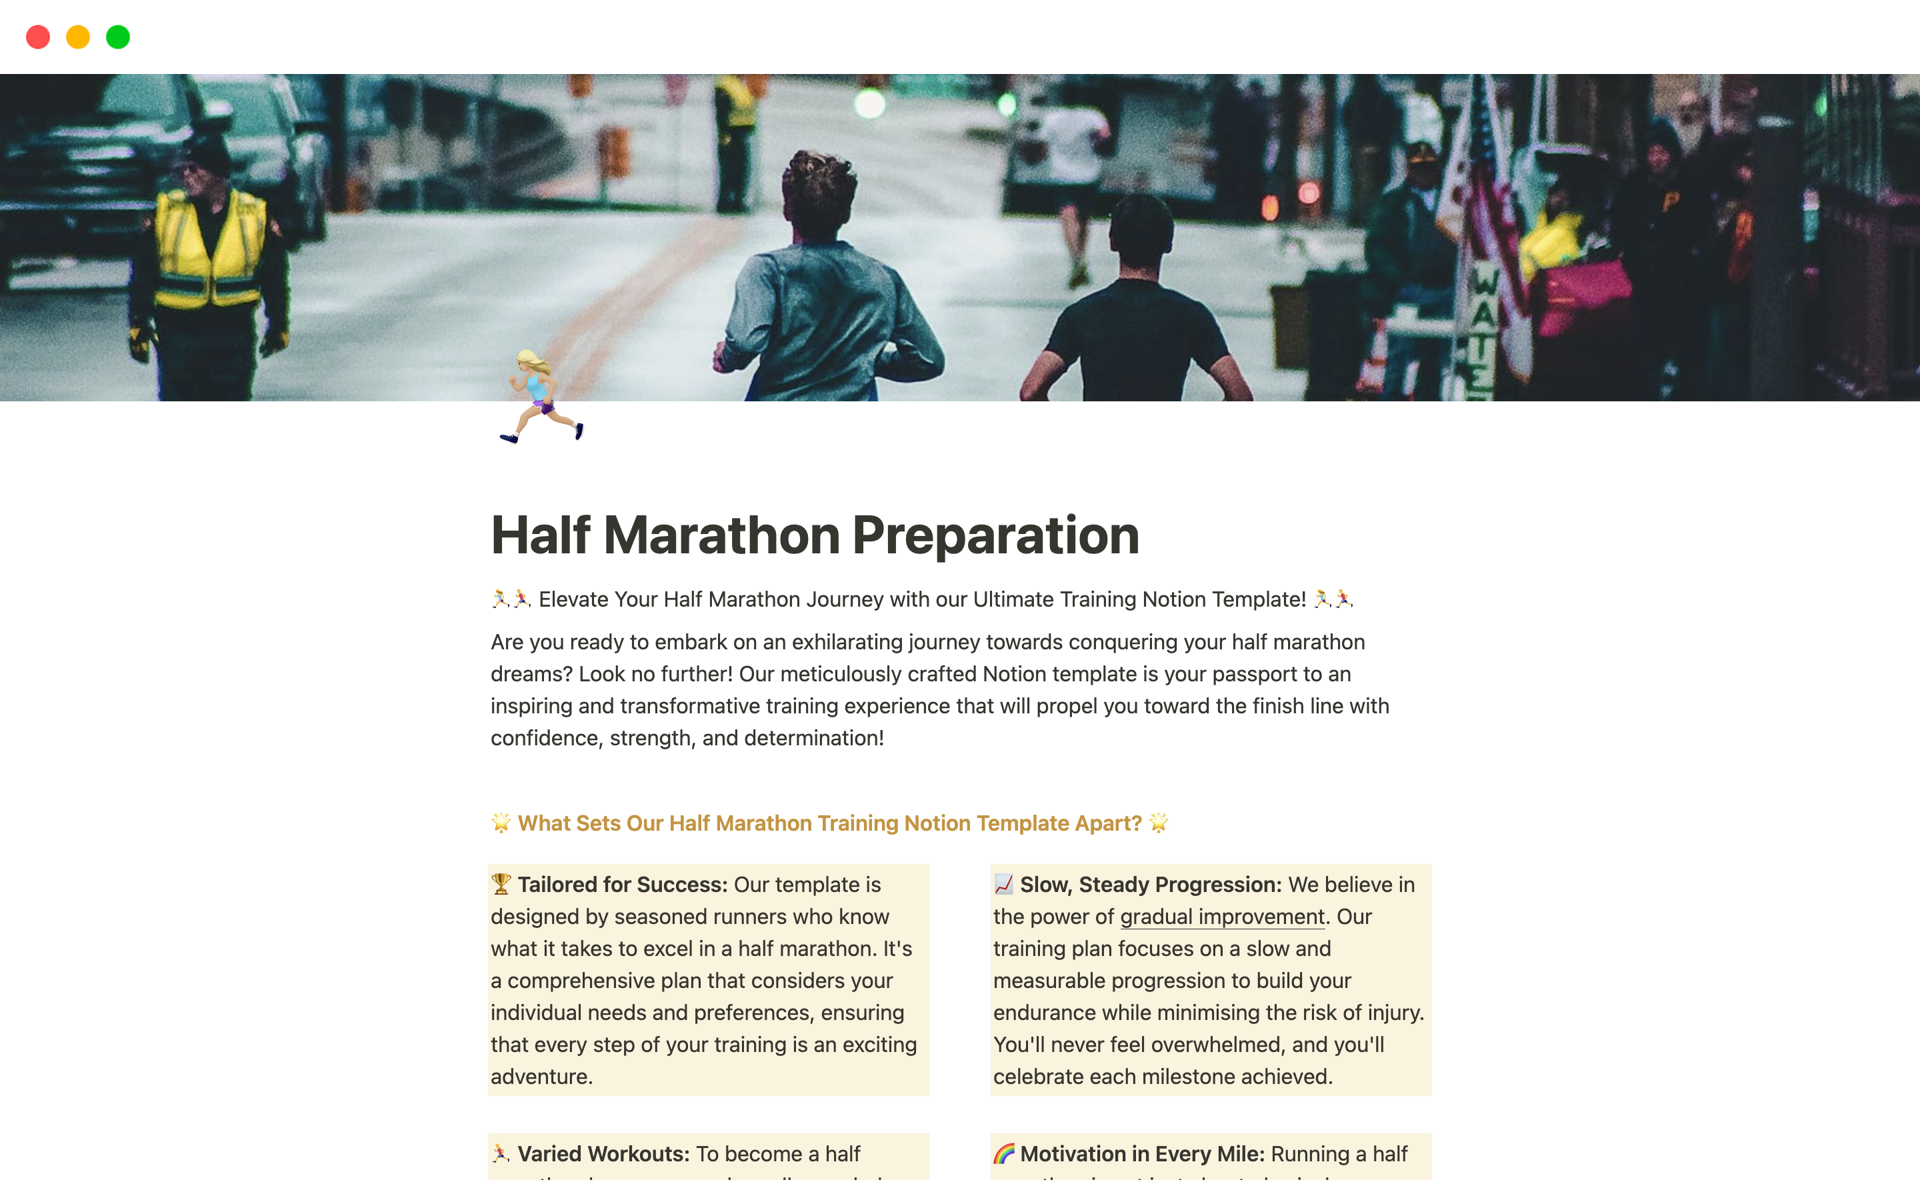 🏃‍♂️🏆 Crush your half marathon goals with ease using our Notion template! 🌟 Unlock your full running potential today. 🚀 #HalfMarathonSuccess